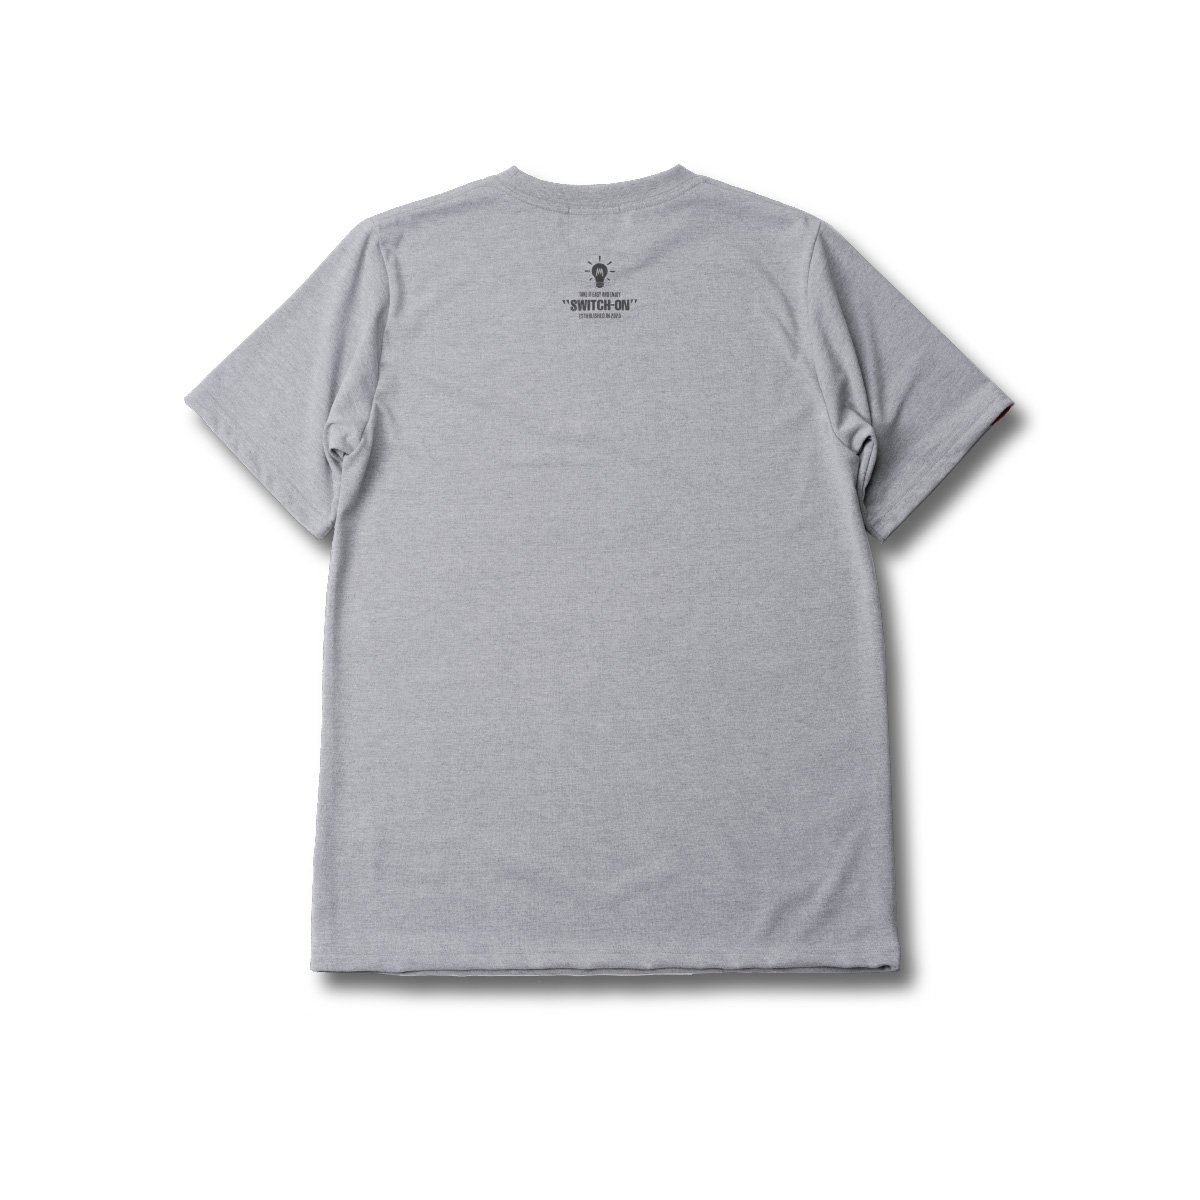 <img class='new_mark_img1' src='https://img.shop-pro.jp/img/new/icons47.gif' style='border:none;display:inline;margin:0px;padding:0px;width:auto;' />Dry Thick T-Shirt